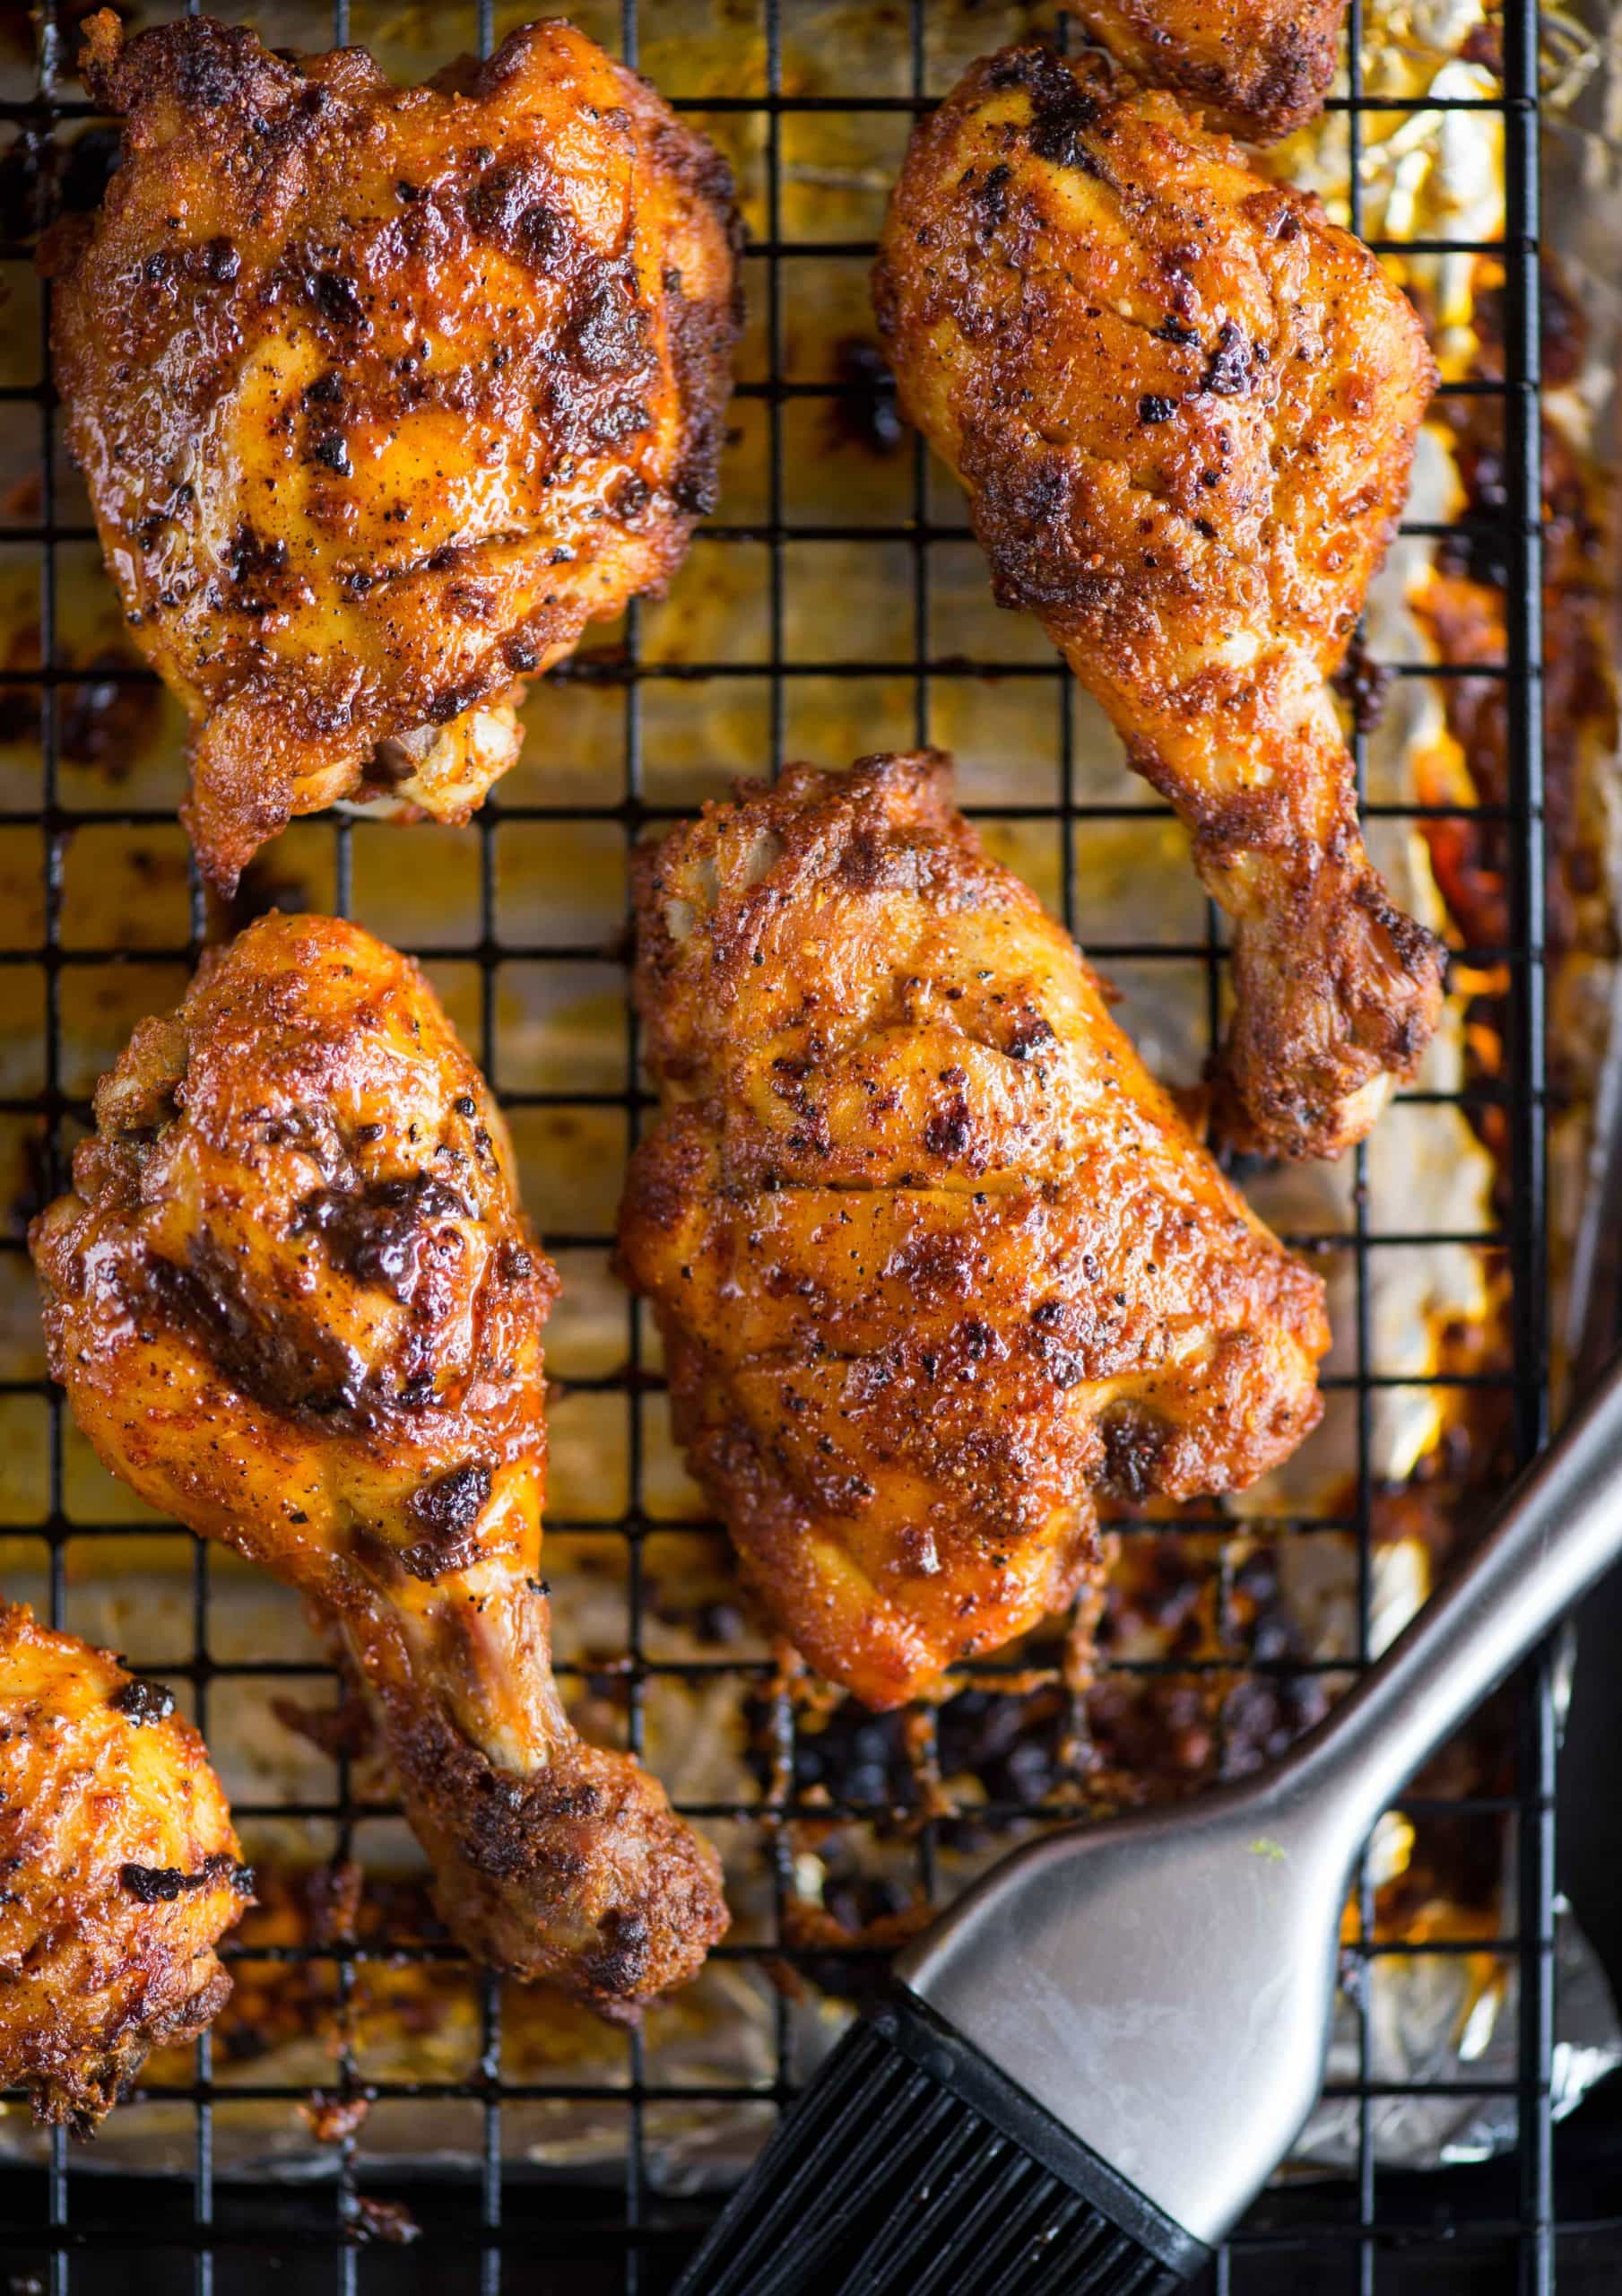 Smoky and juicy Tandoori Chicken gets its flavour from the Yogurt, ginger garlic paste and spice marination. It can be made on the grill, oven or Stovetop.